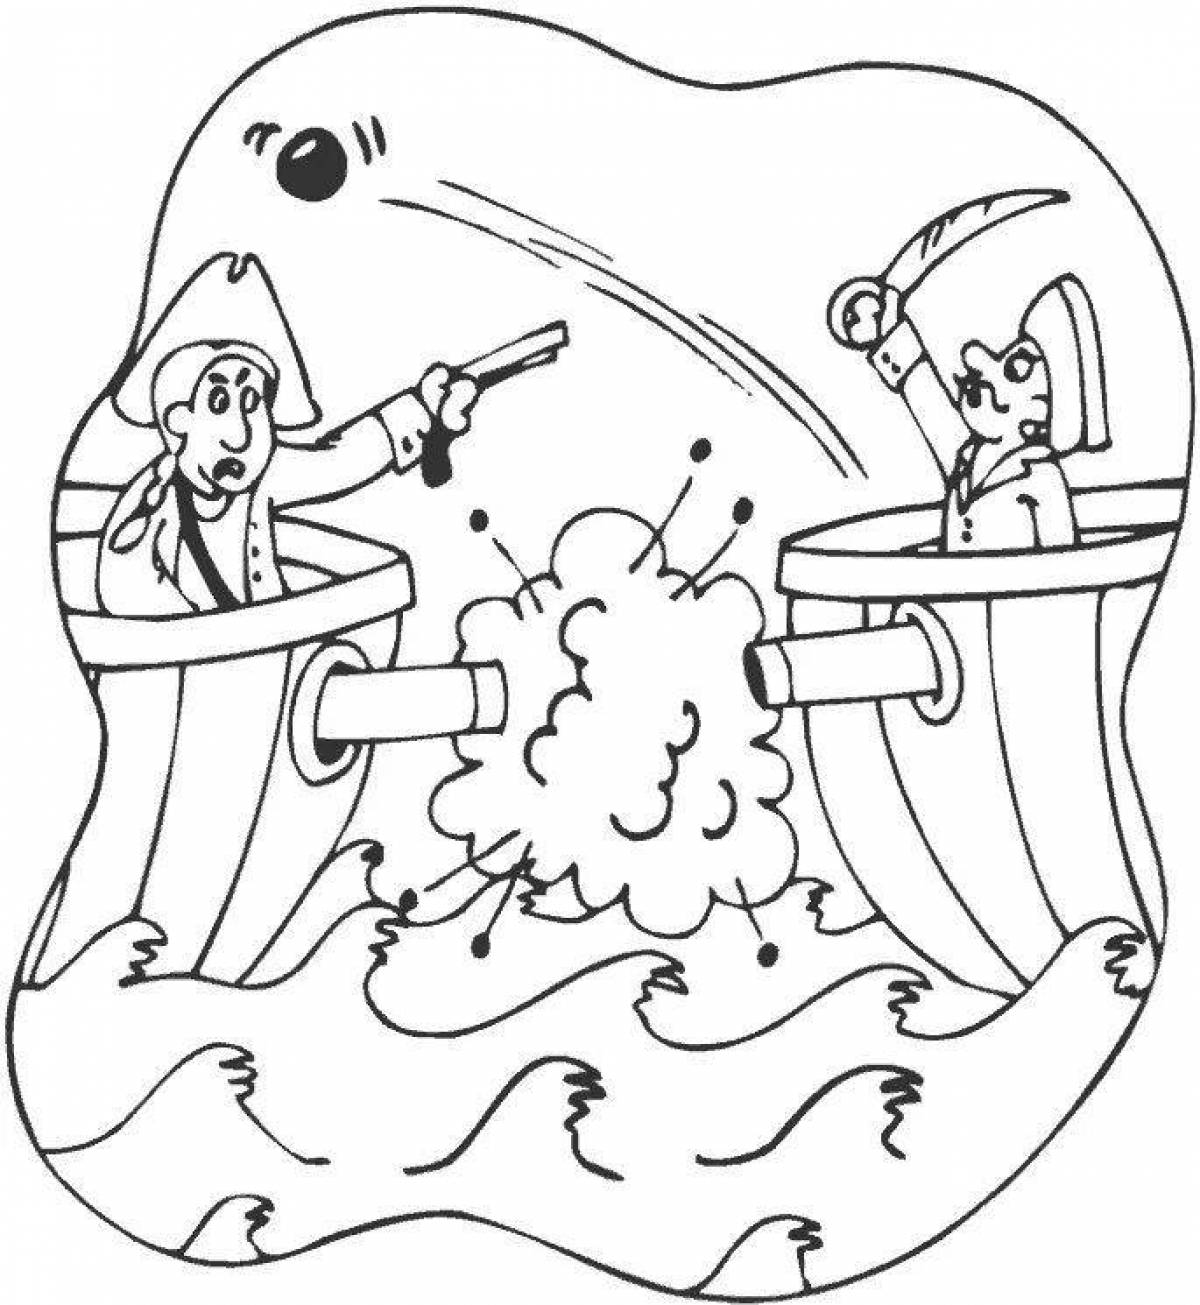 Exciting sea battle coloring page